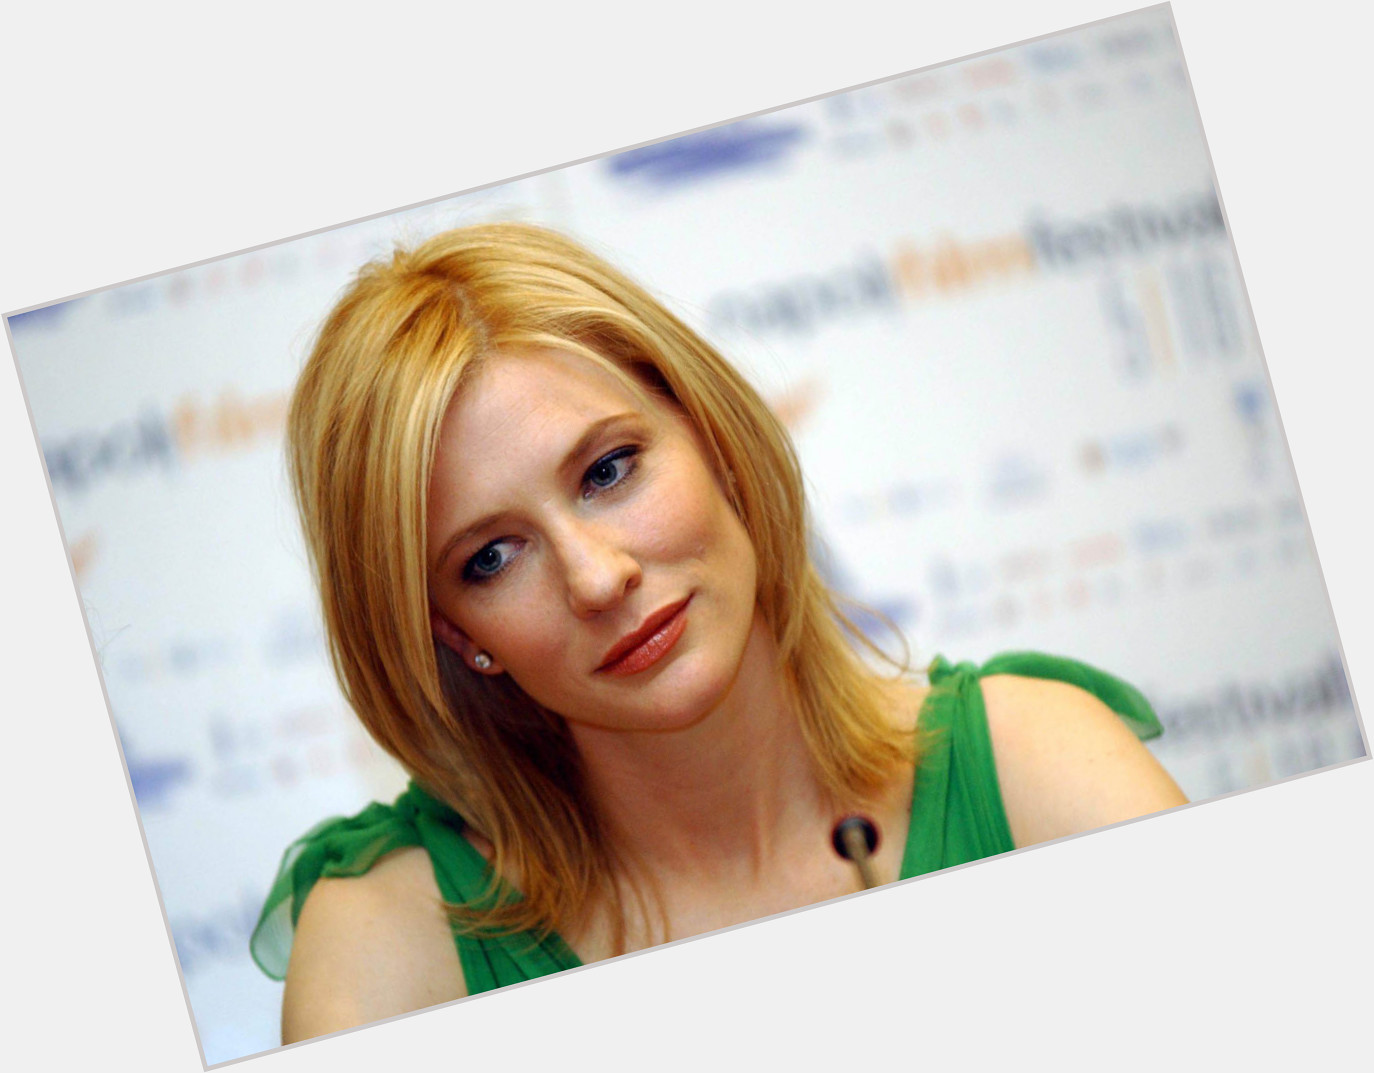 Can\t believe Cate Blanchett is 51 today. Happy Birthday to this stunning actress. 